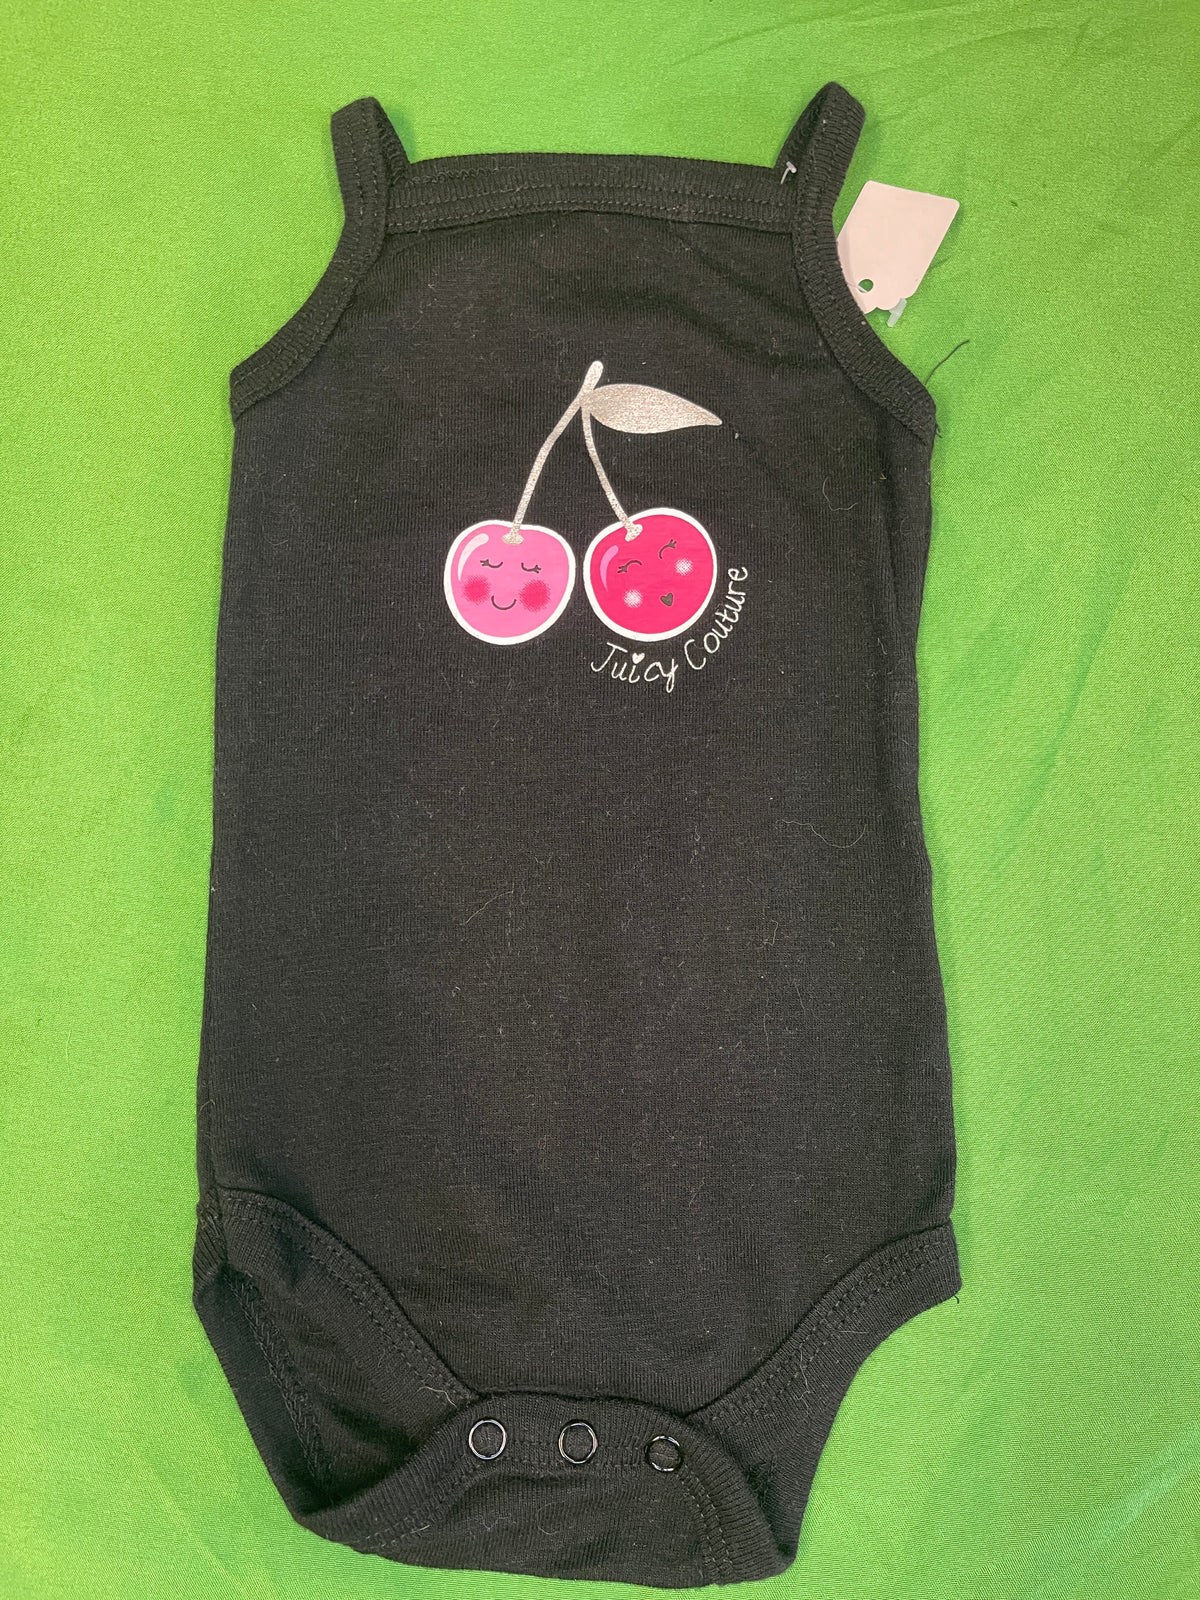 Juicy Couture Sparkly Cherry Sleeveless Girls' Bodysuit/Vest Infant Baby 0-3 Months